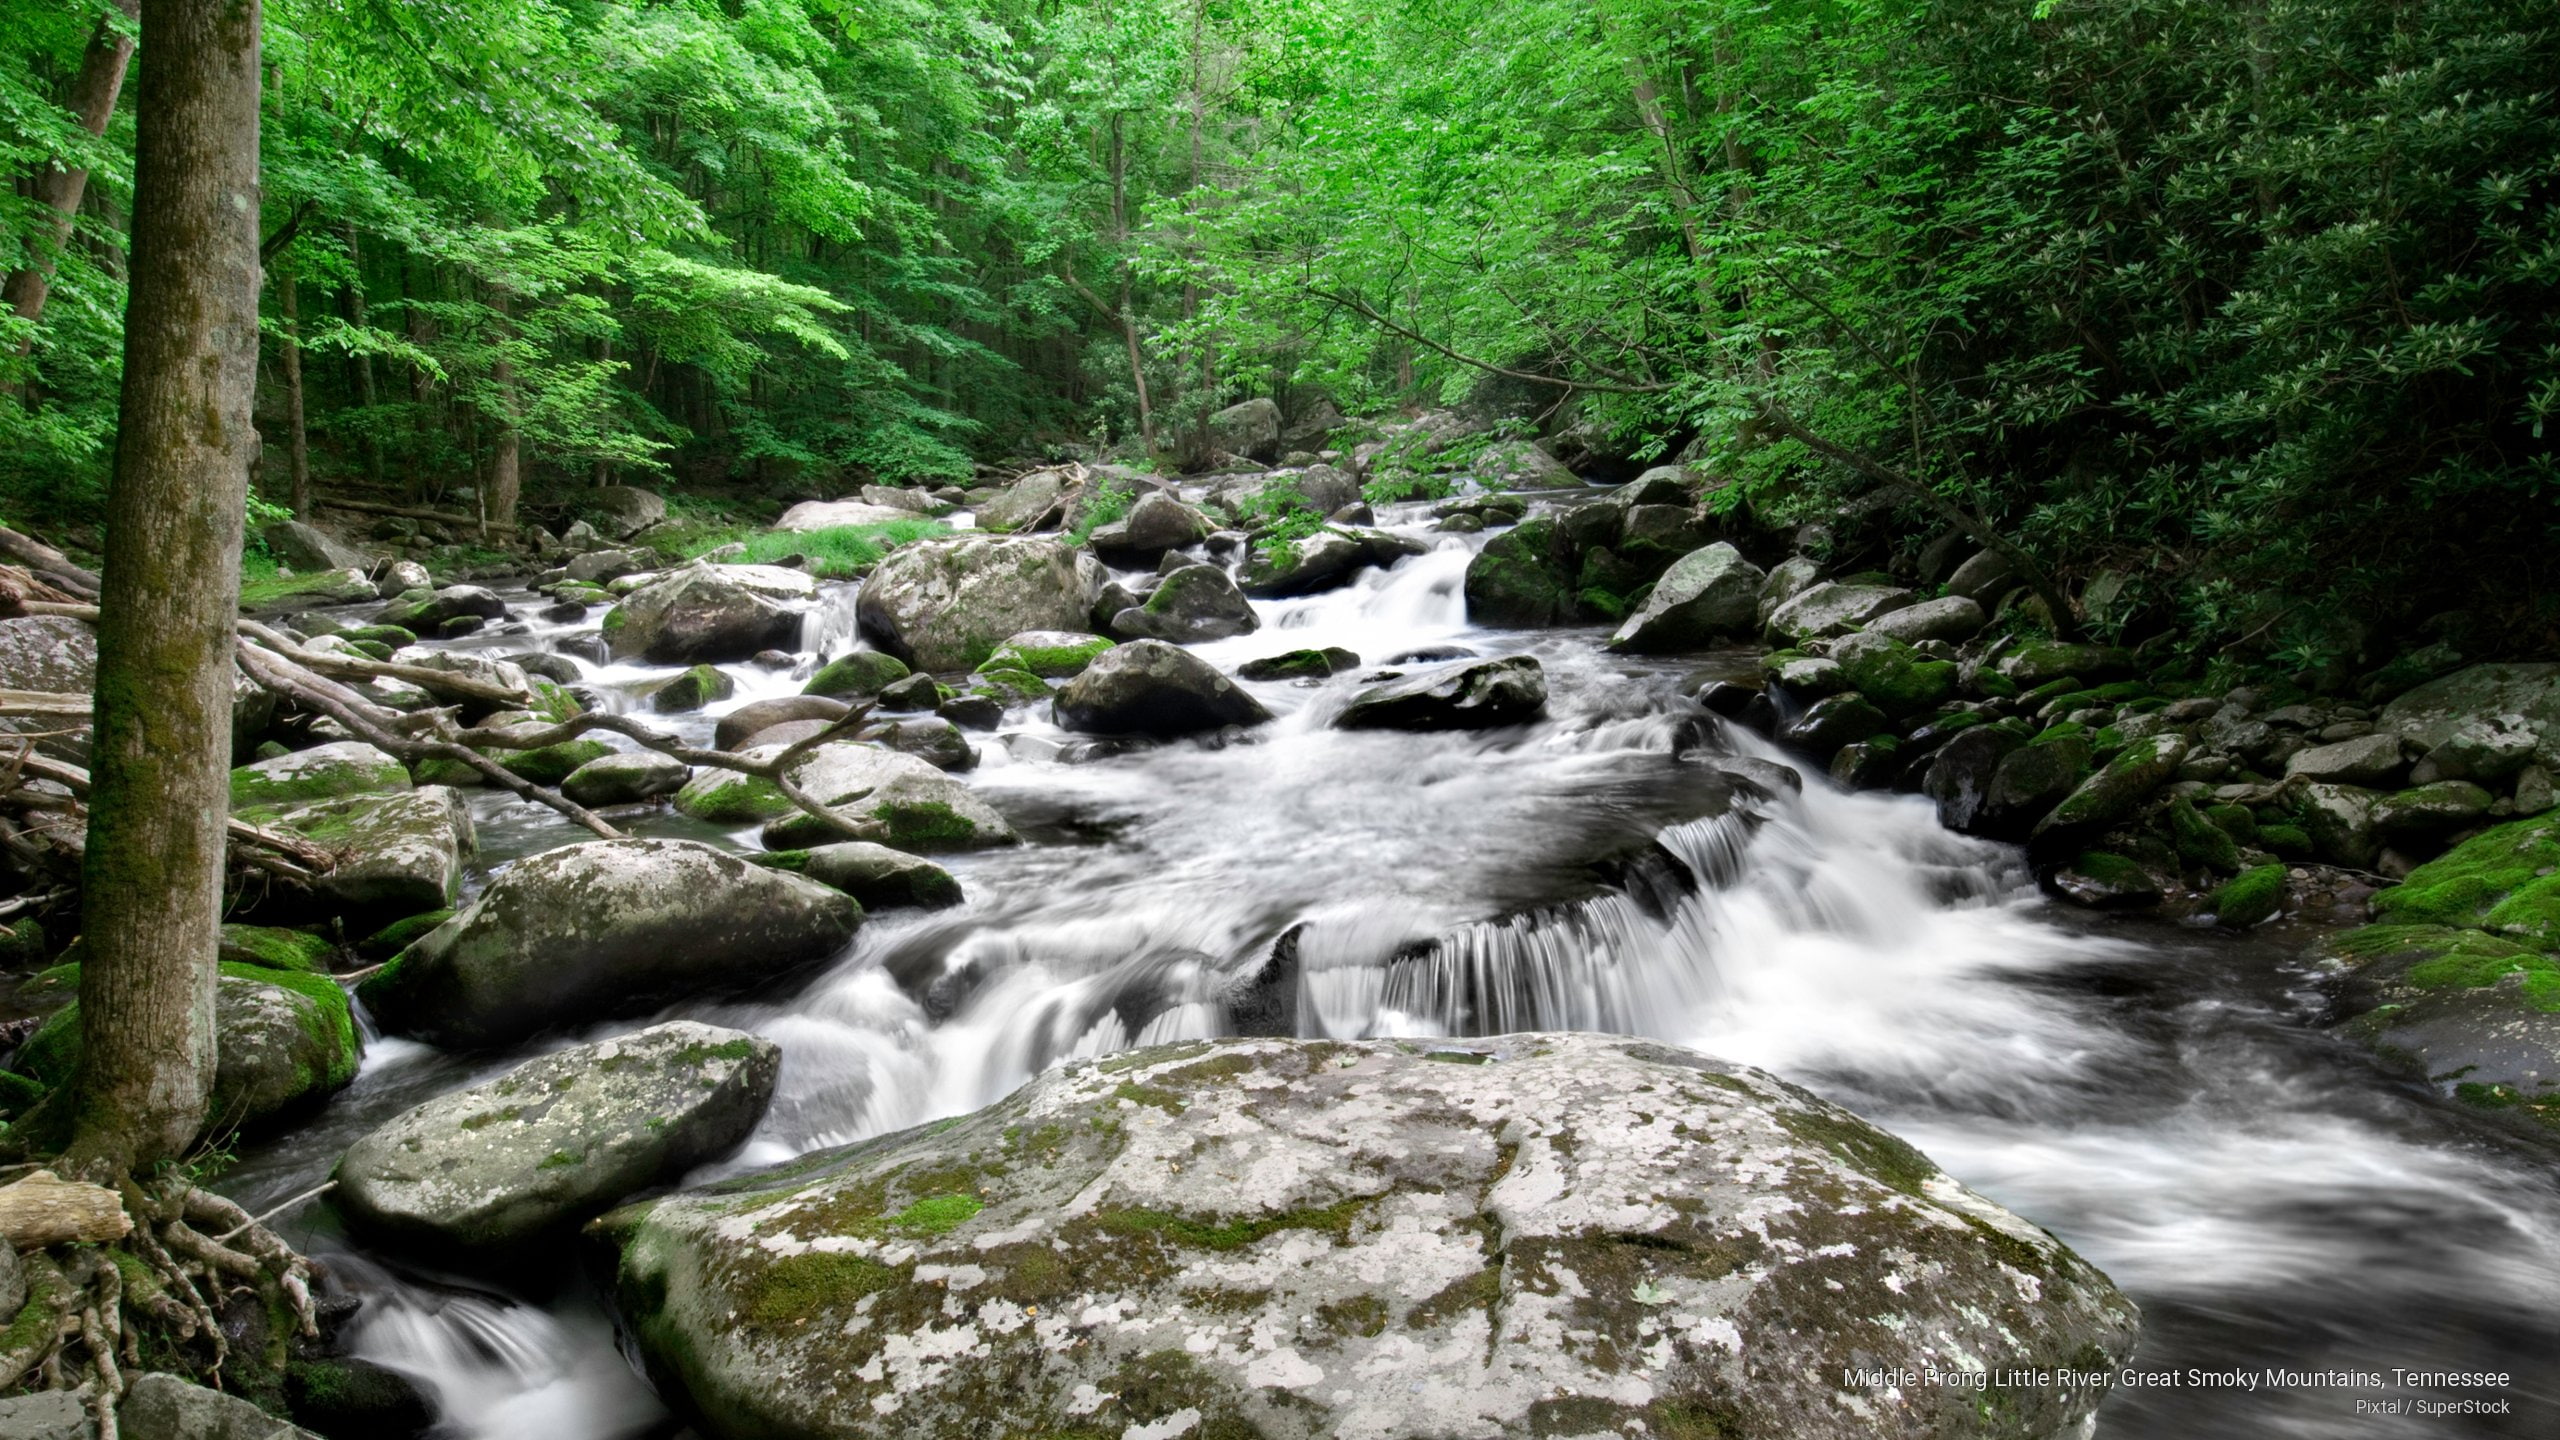 Middle Prong Little River, Great Smoky Mountains, Tennessee, Spring/Summer